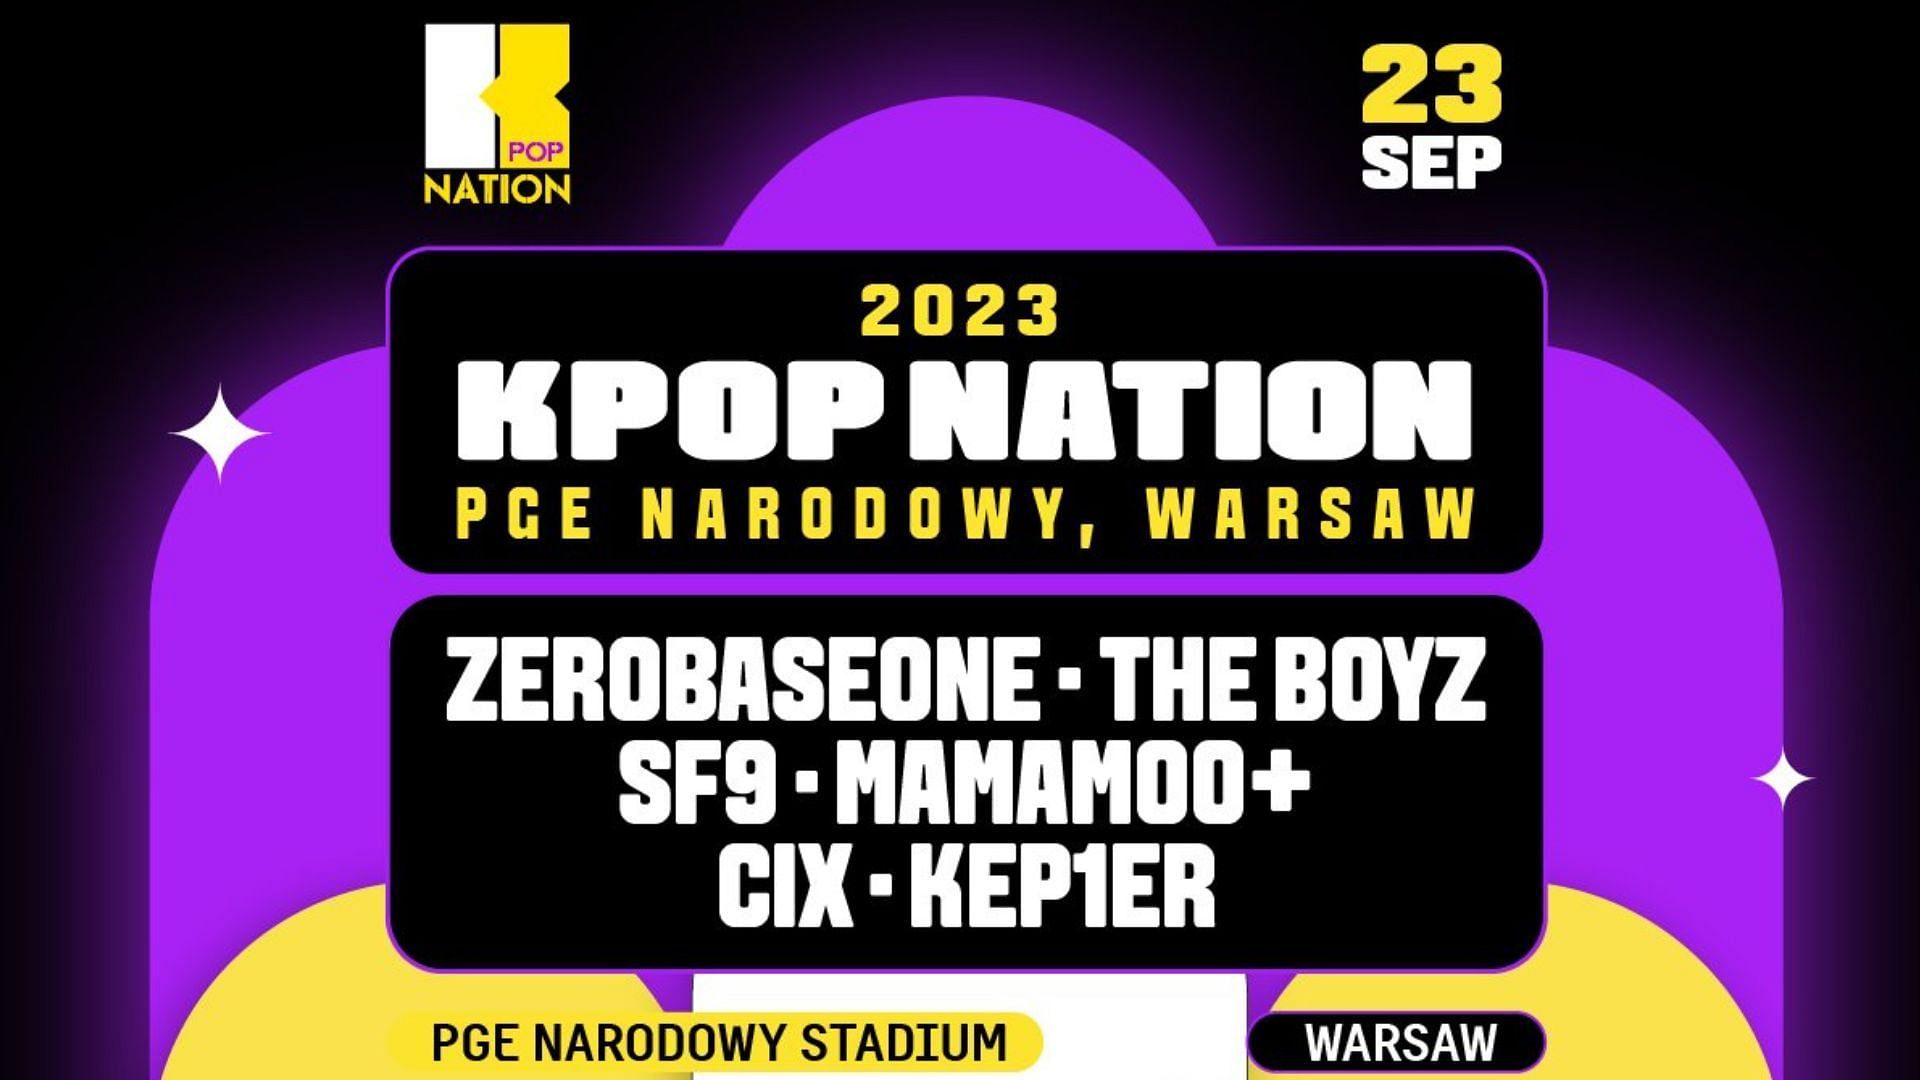 Poland to host big names of K-pop at the 2023 KPOP NATION (Image via Twitter/mykpopnation)